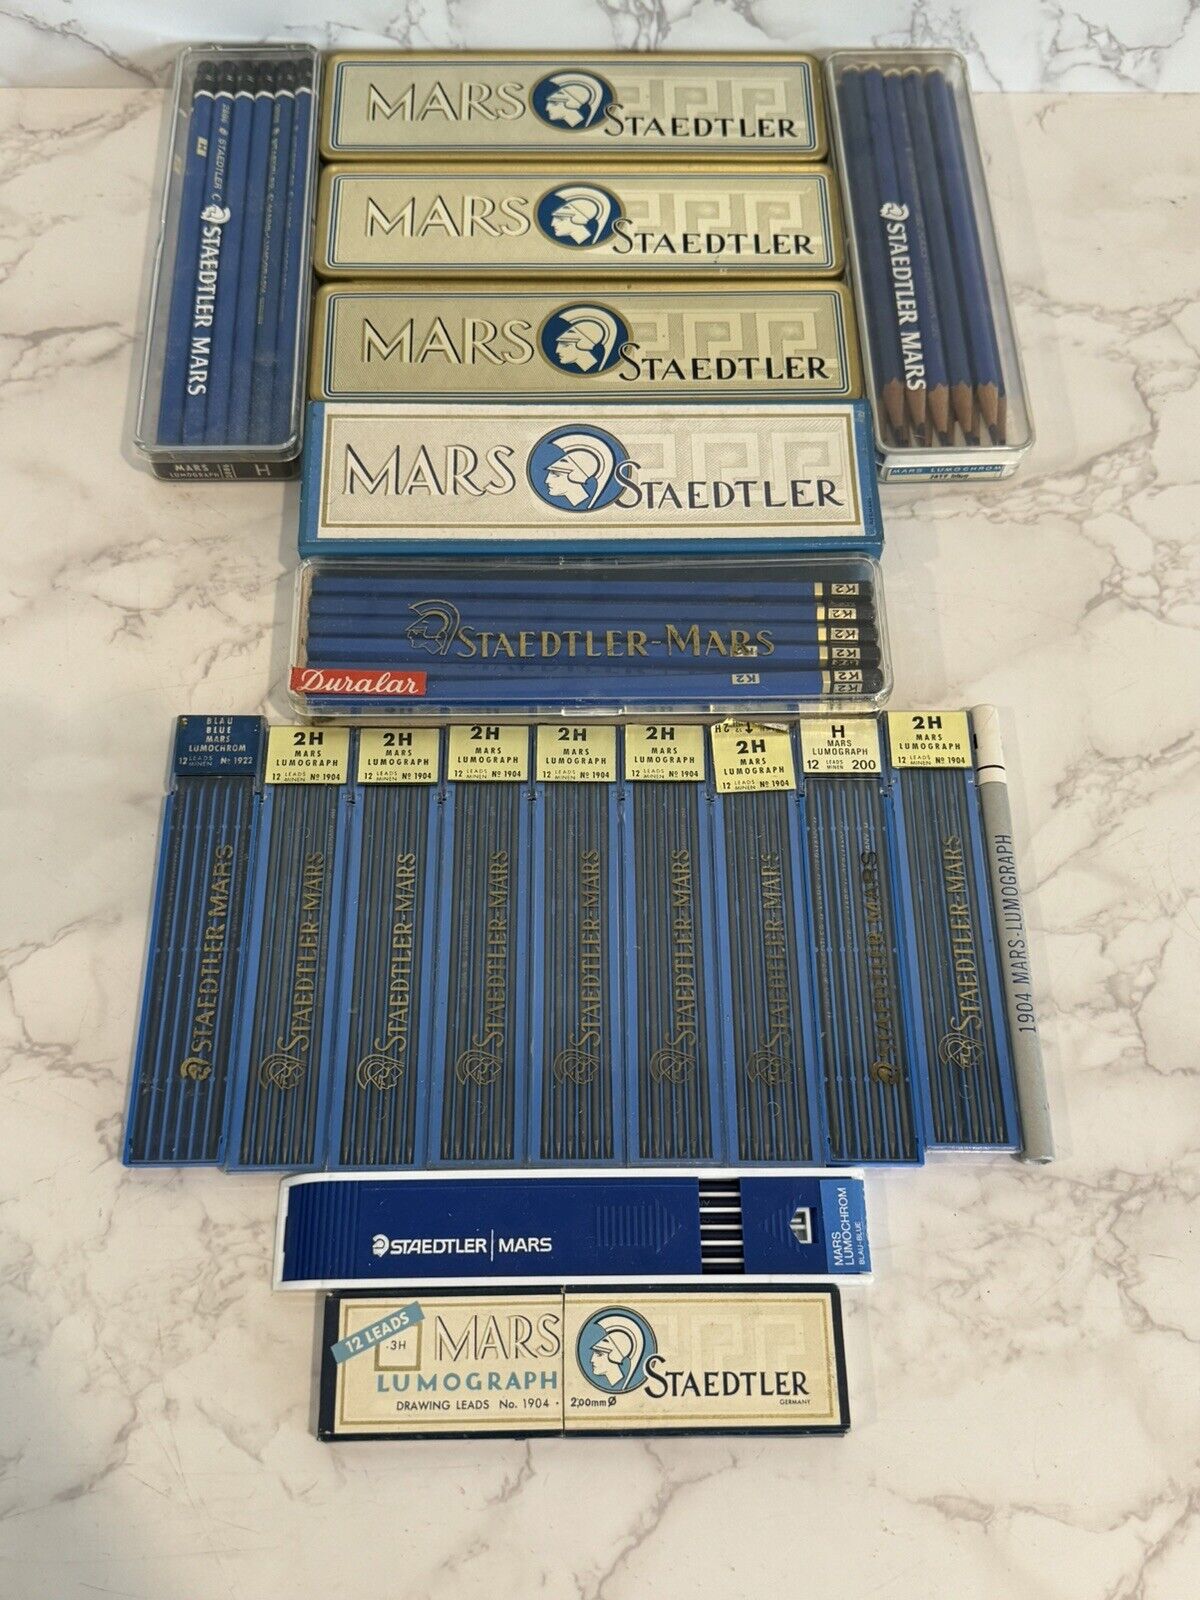 Huge Mixed Lot Of Staedtler Mars Pencils, Tins, And Leads